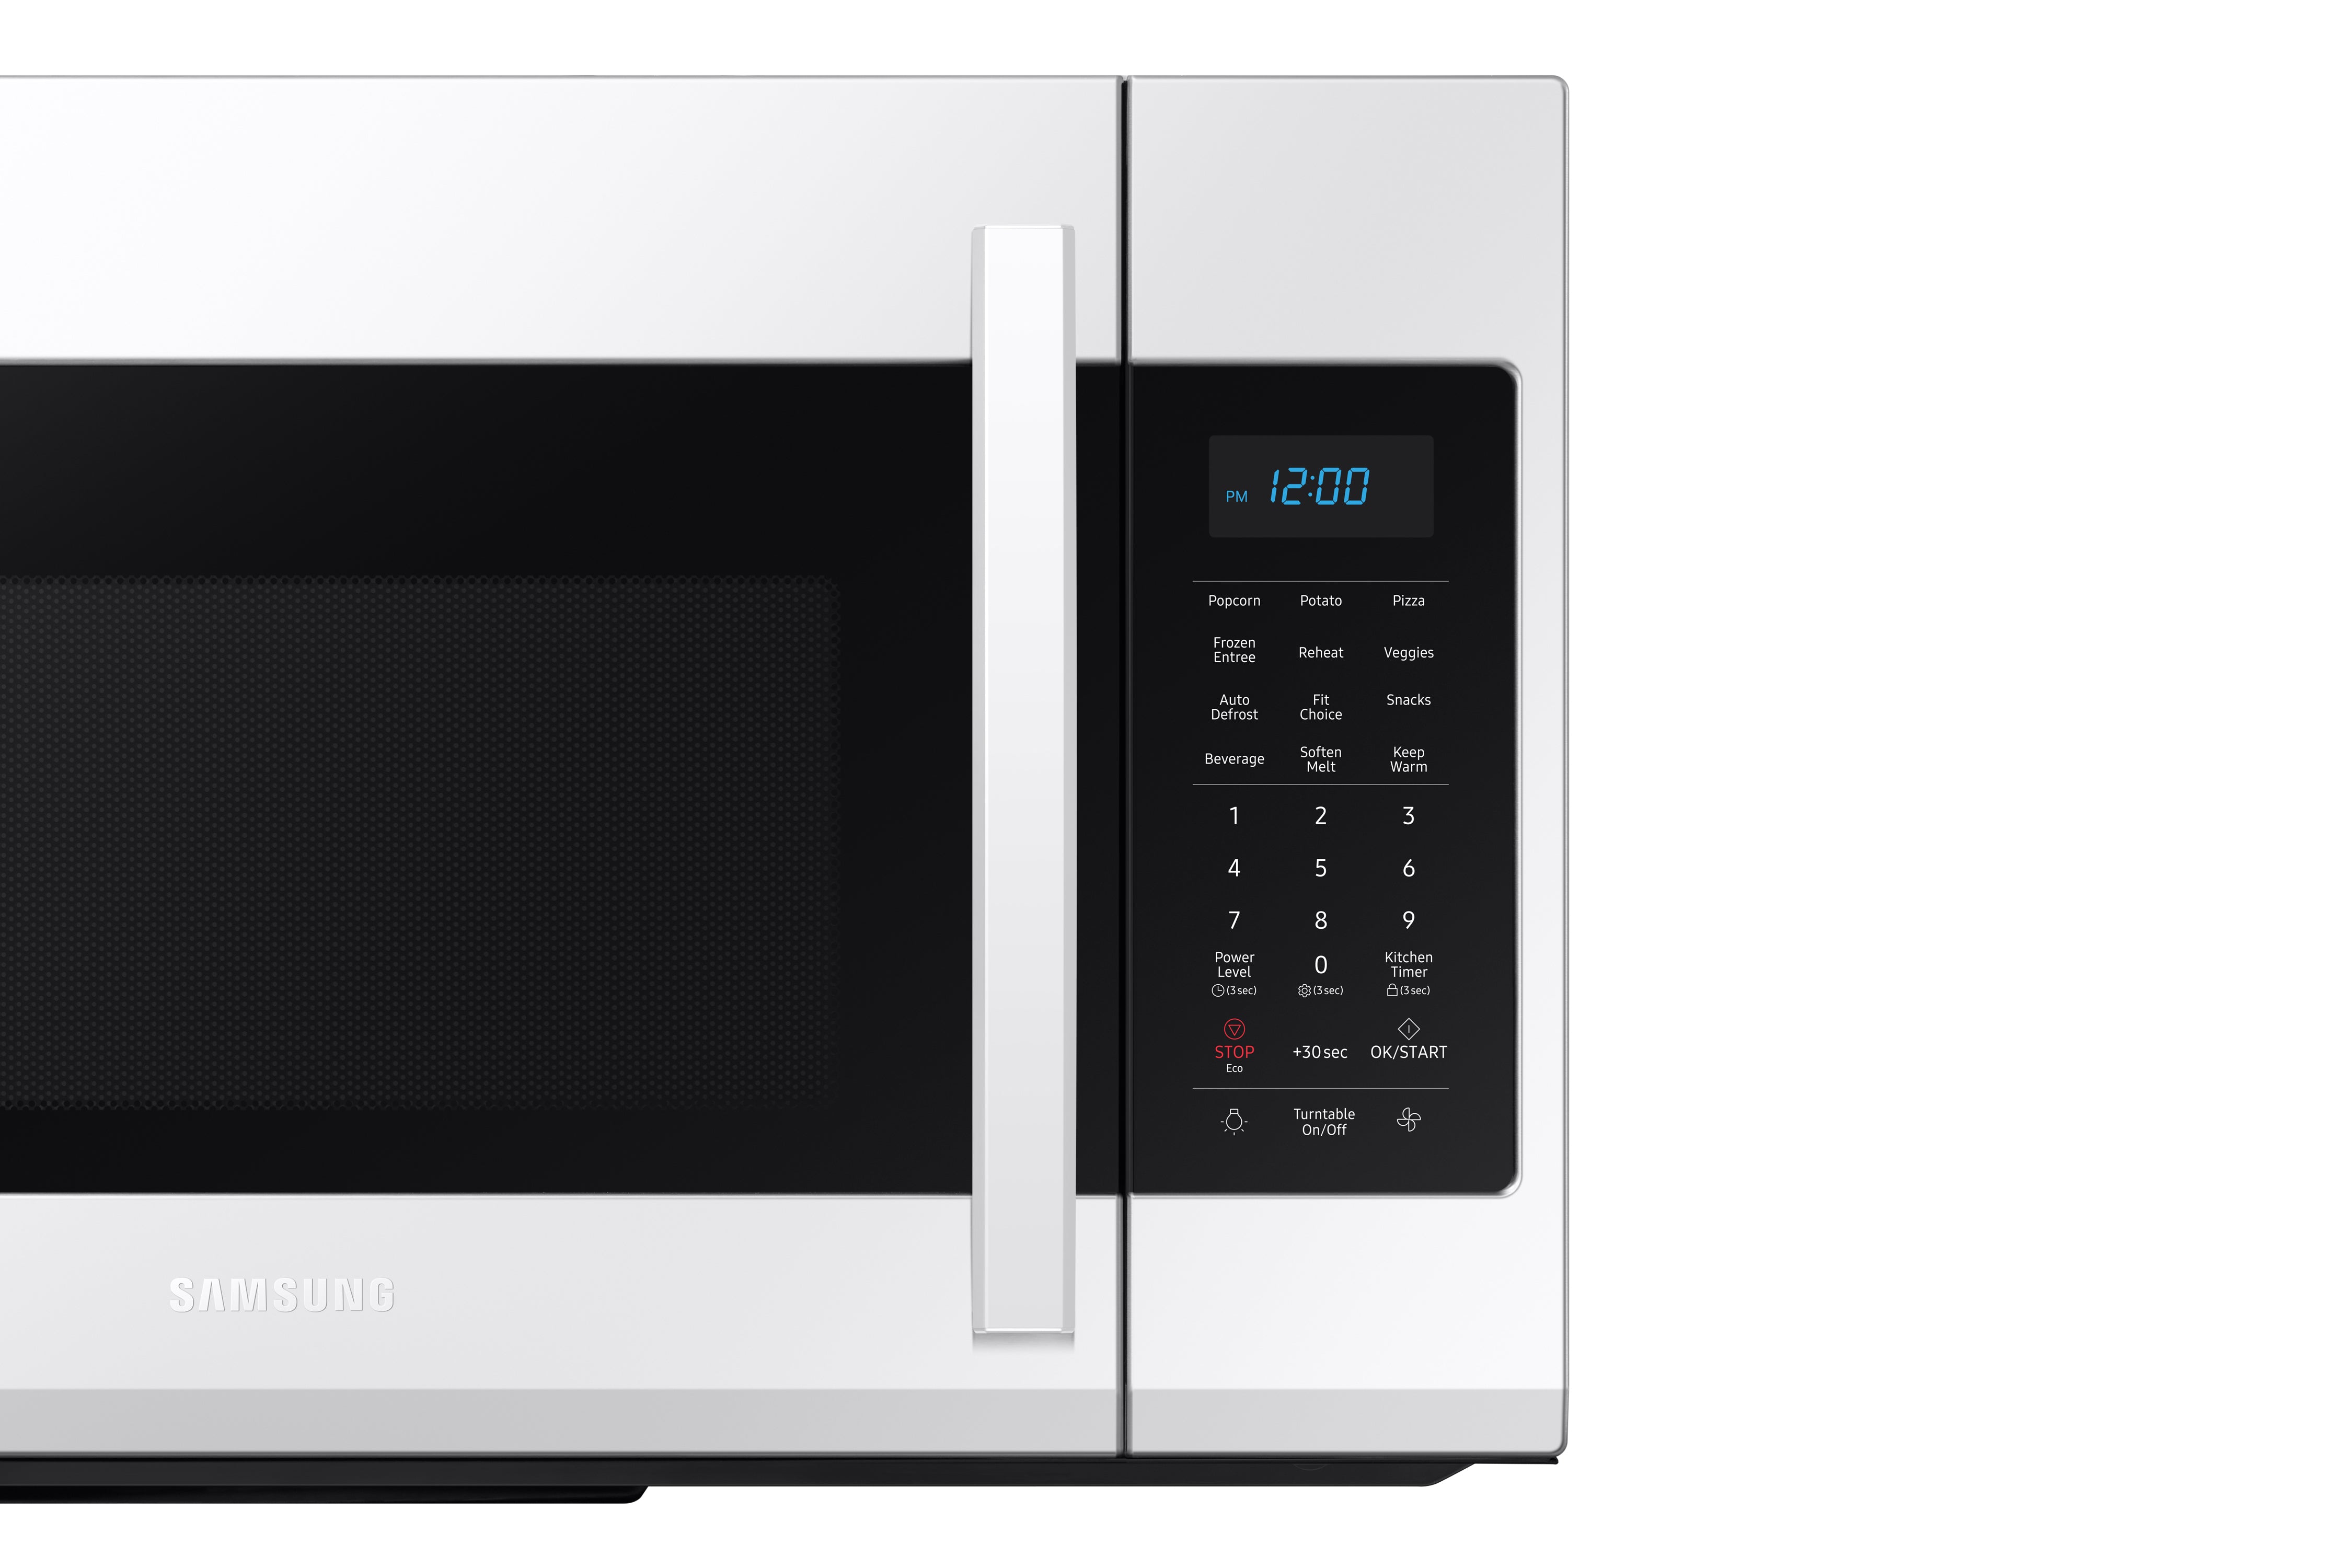 Samsung - 1.9 cu. Ft  Over the range Microwave in White - ME19R7041FW